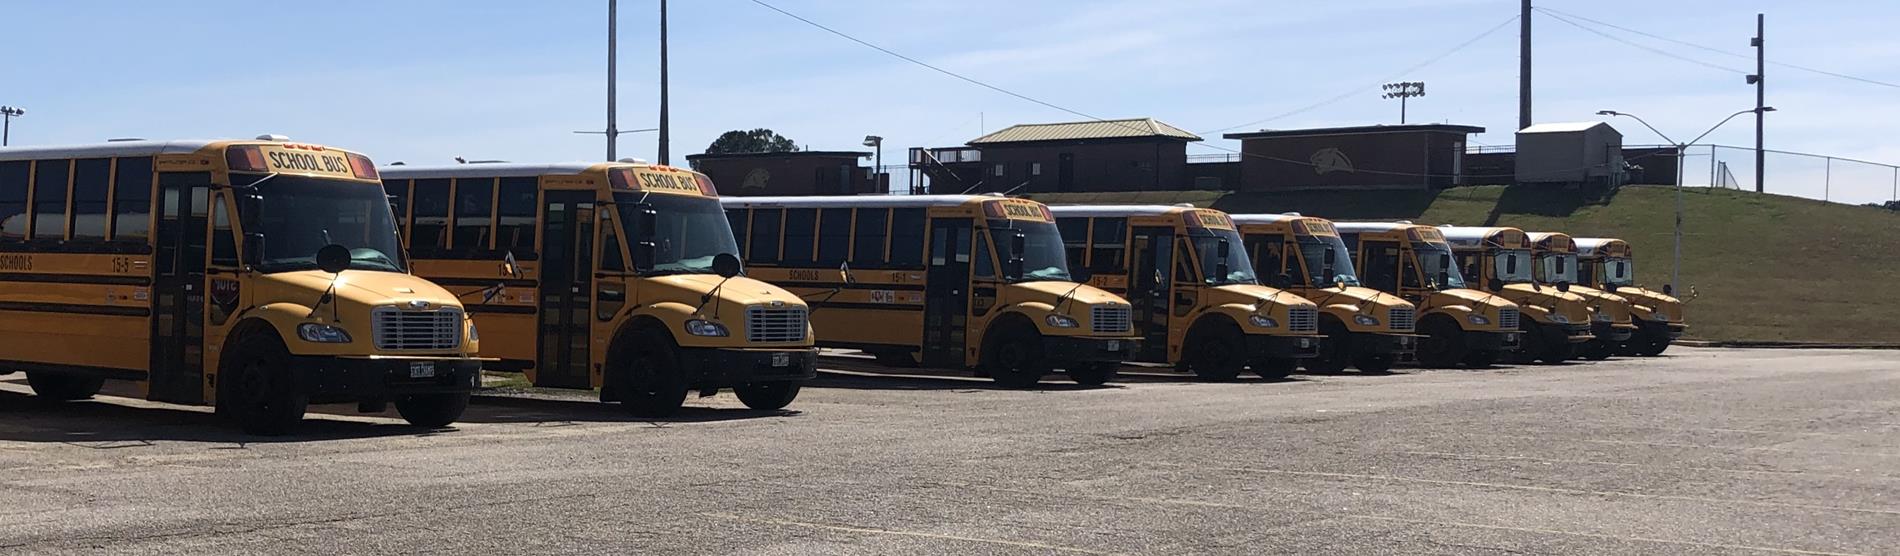 A photo of nine yellow school buses parked in a row.